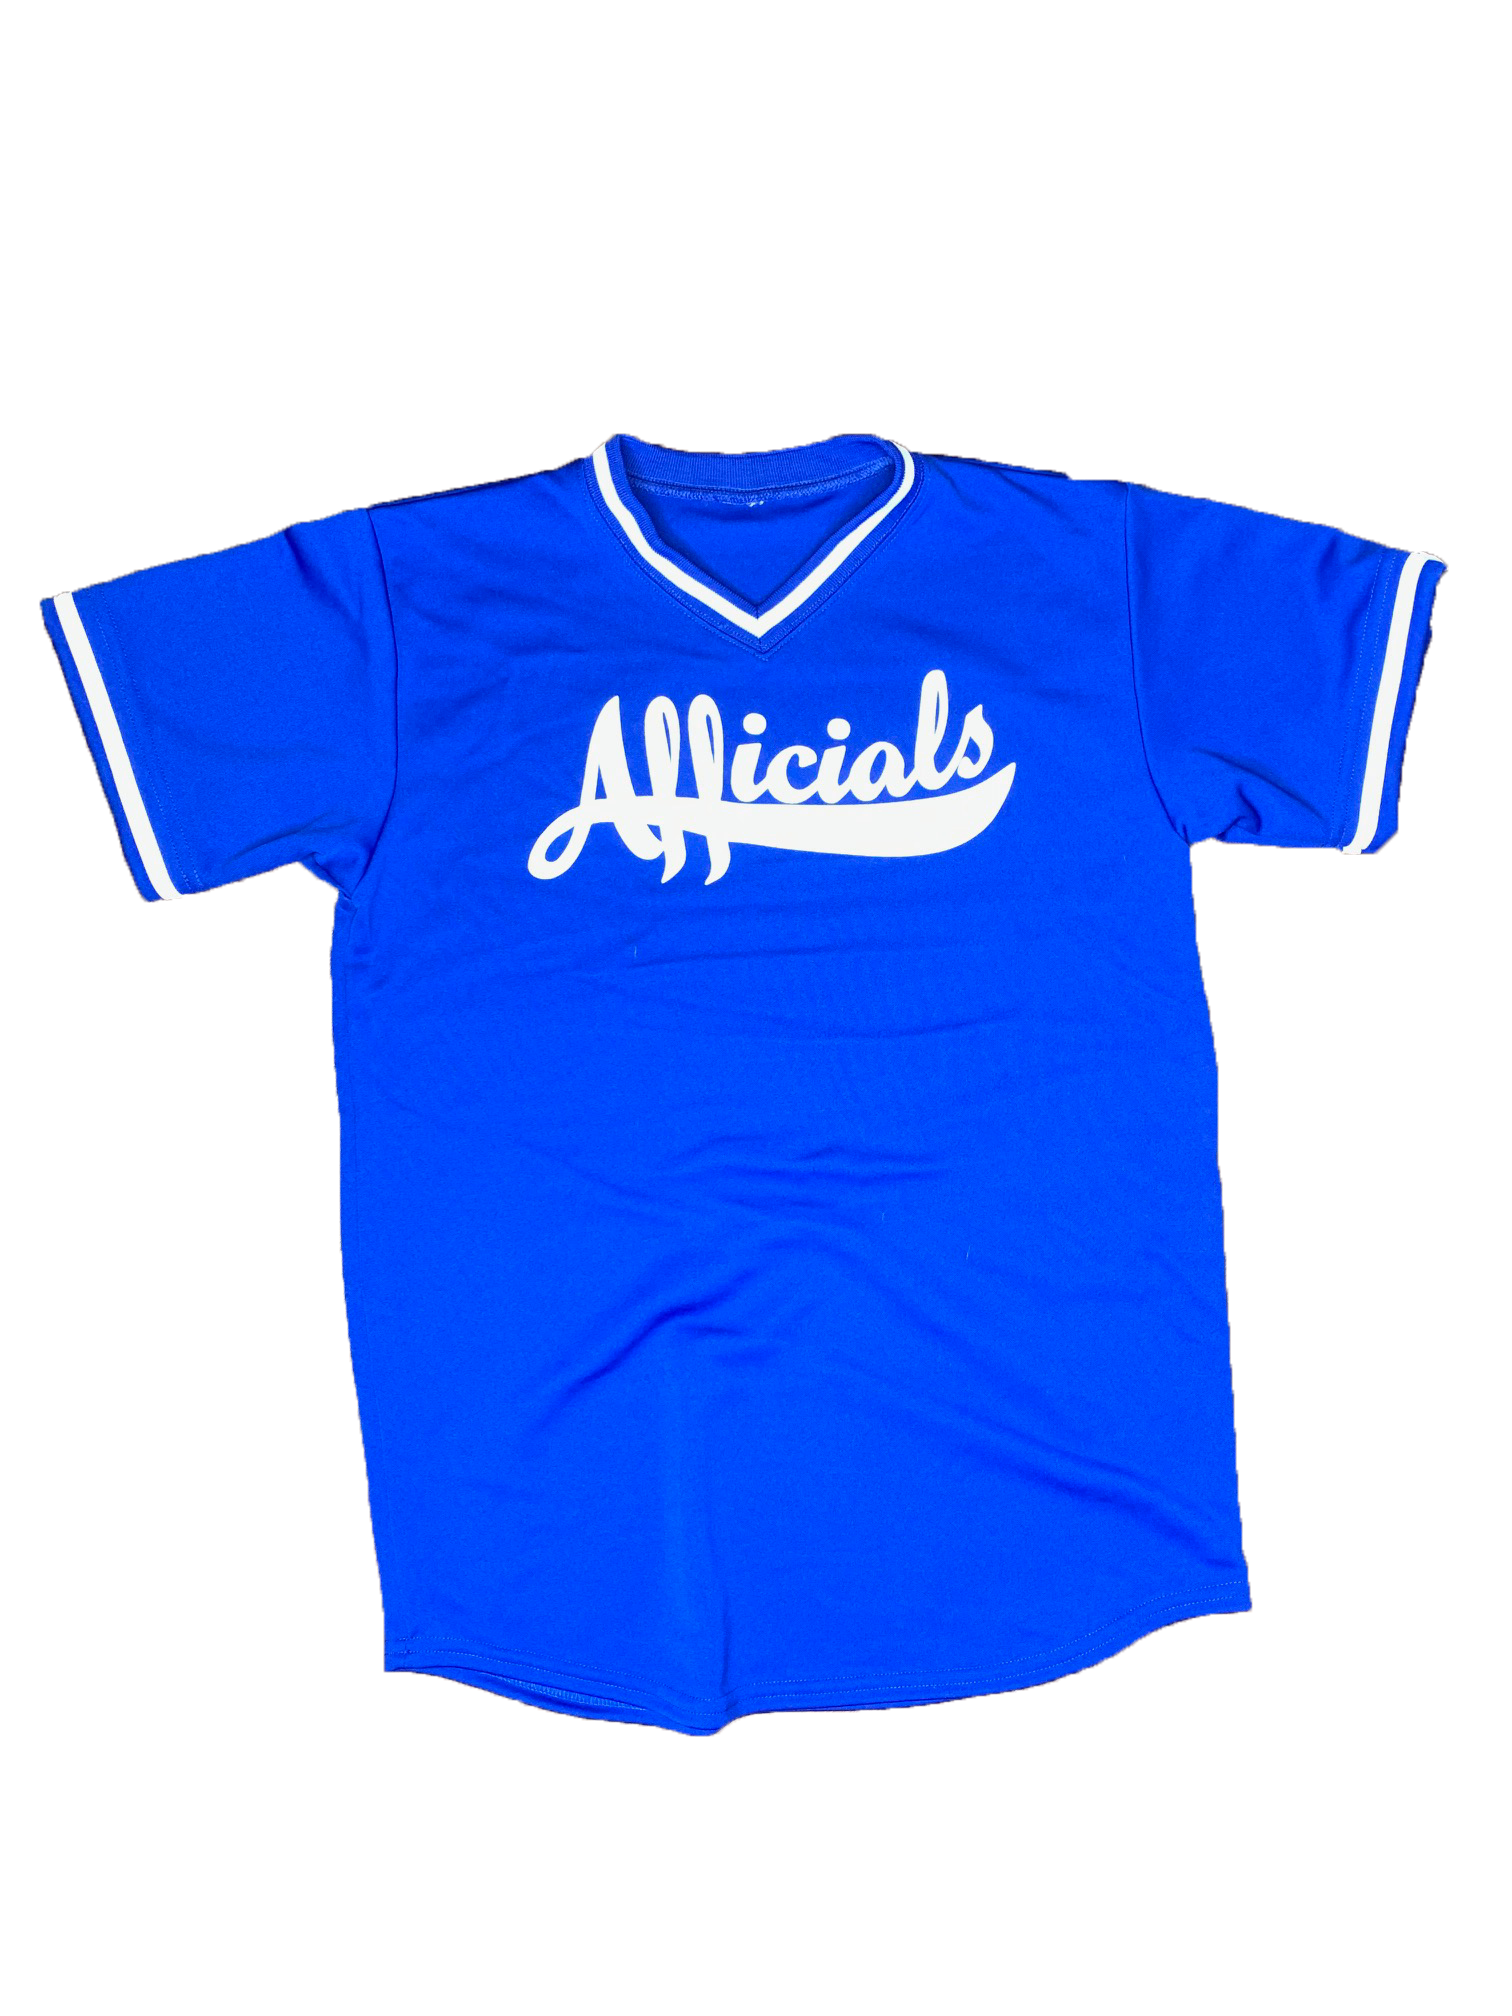 Afficials Signature Baseball Jersey ROYAL BLUE/WHITE – Afficials THE LABEL ™